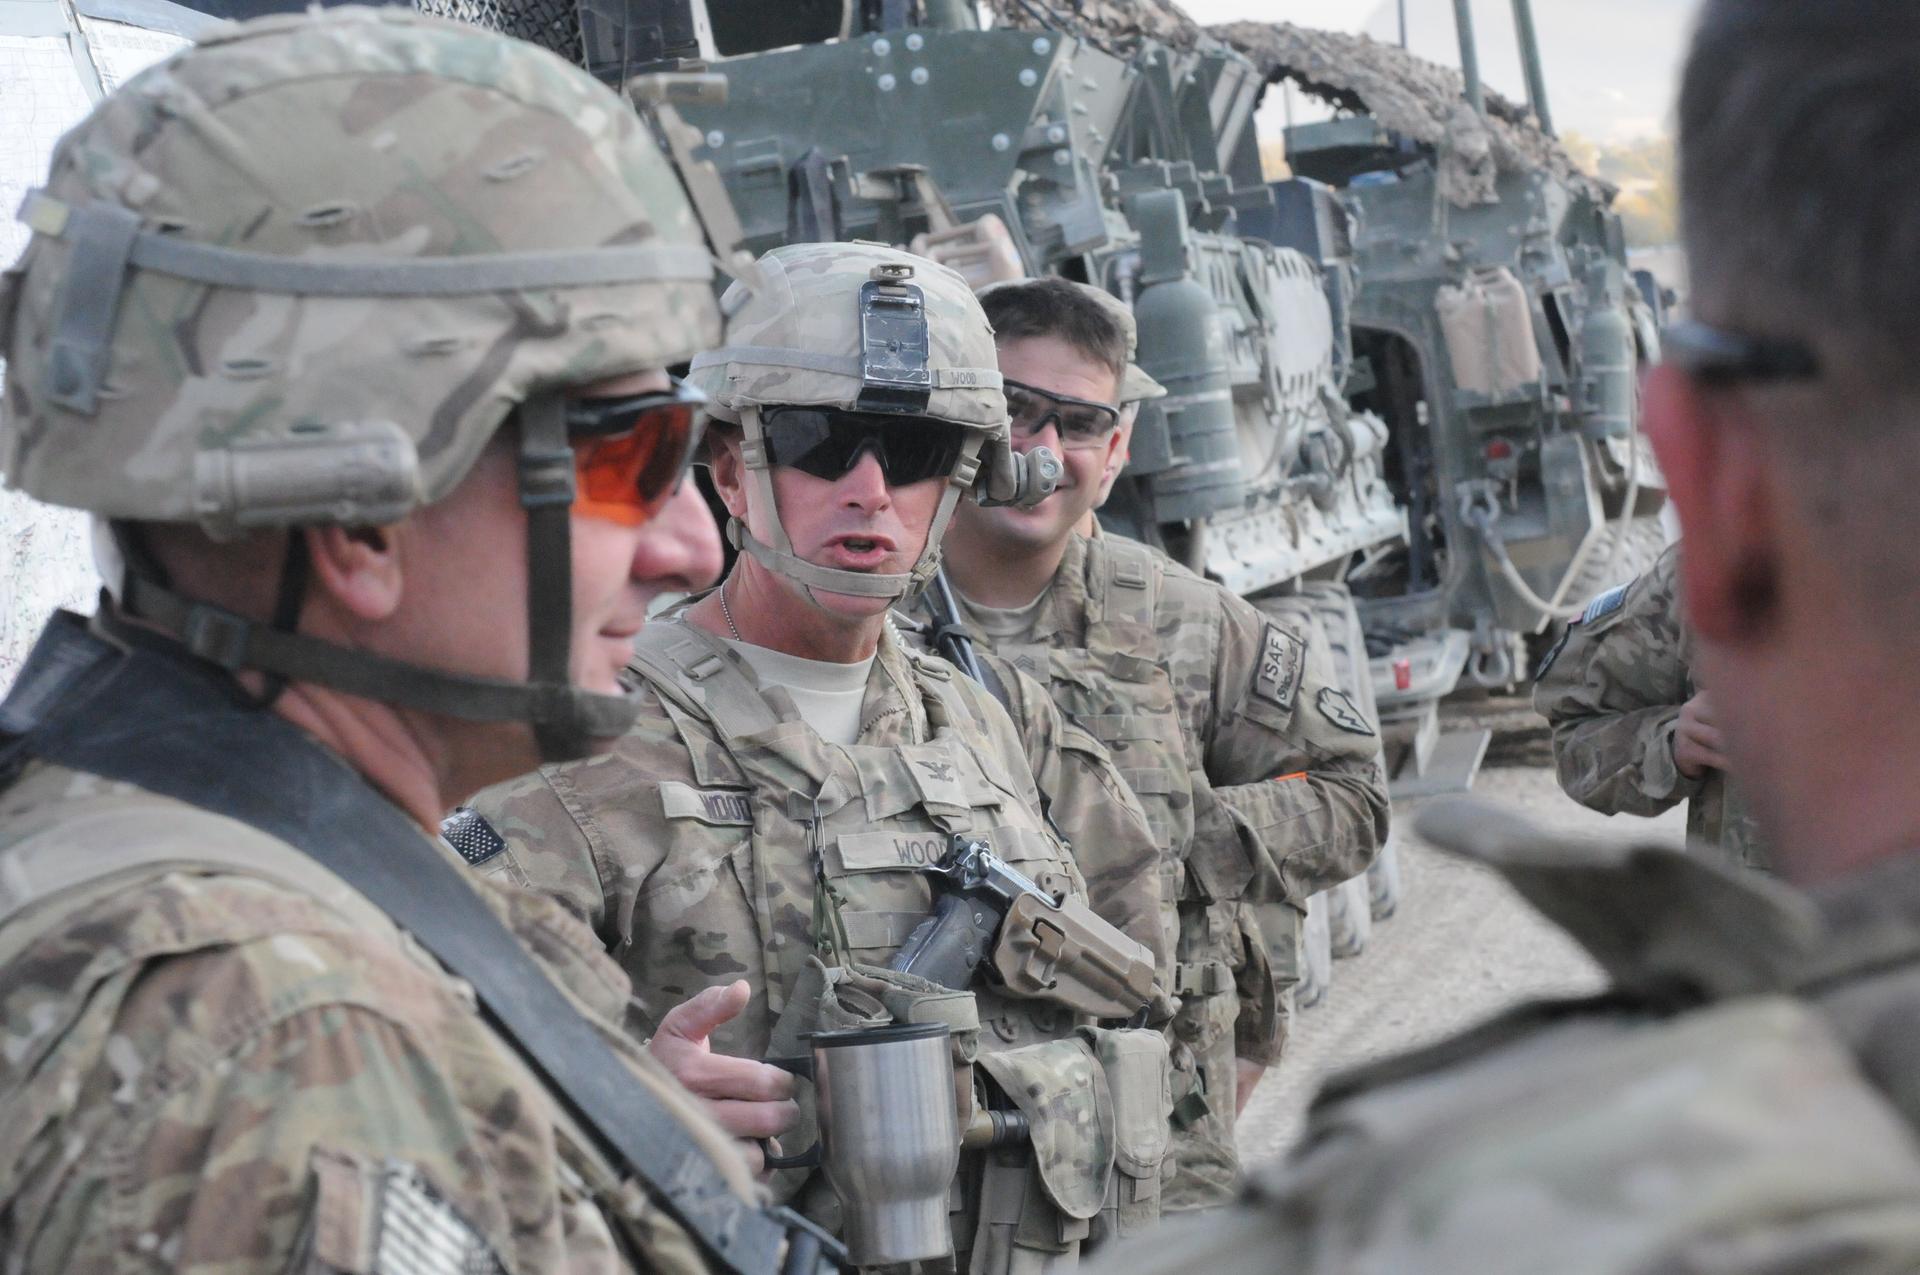 Col. Todd Wood, then commander of 1st Stryker Brigade Combat Team, 25th Infantry Division, talks with soldiers at FOB Masum Ghar in Kandahar province, Afghanistan in 2011.